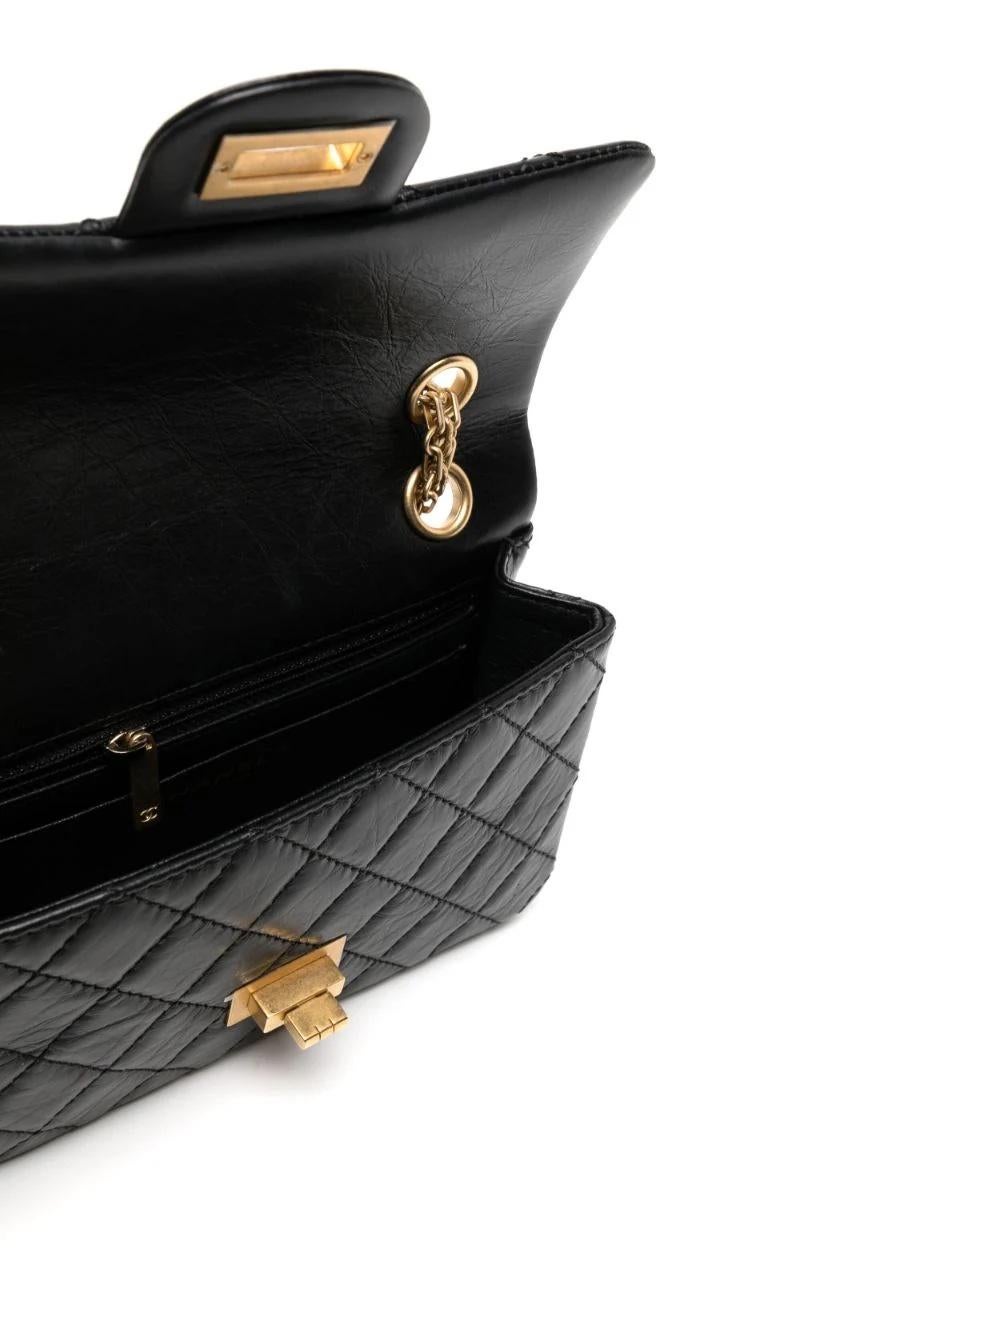 Re-introduced by Karl Lagerfeld in 2005 to celebrate the 50th anniversary of the original 2.55 bag, the 2.55 Reissue maintains the unique features envisioned by Coco Chanel in 1955. Constructed from diamond-quilted leather to ensure its durability